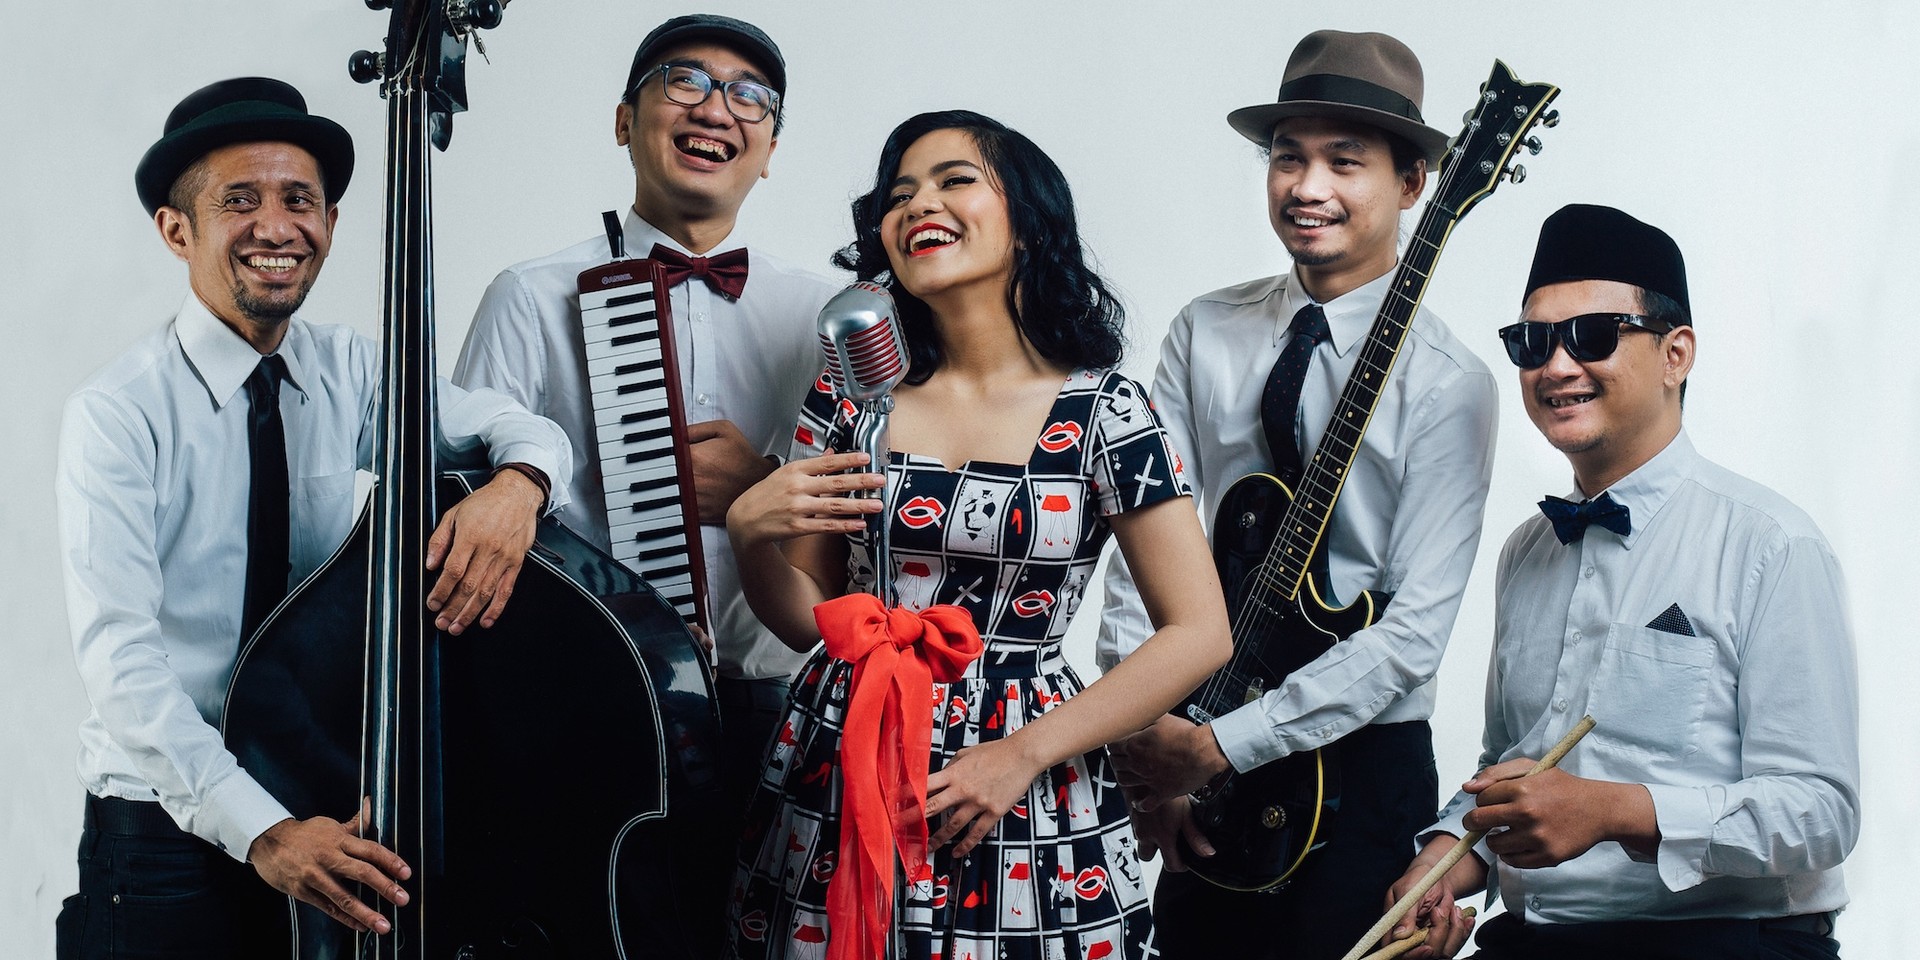 Let's reminisce over Indonesian 1950s pop with Deredia